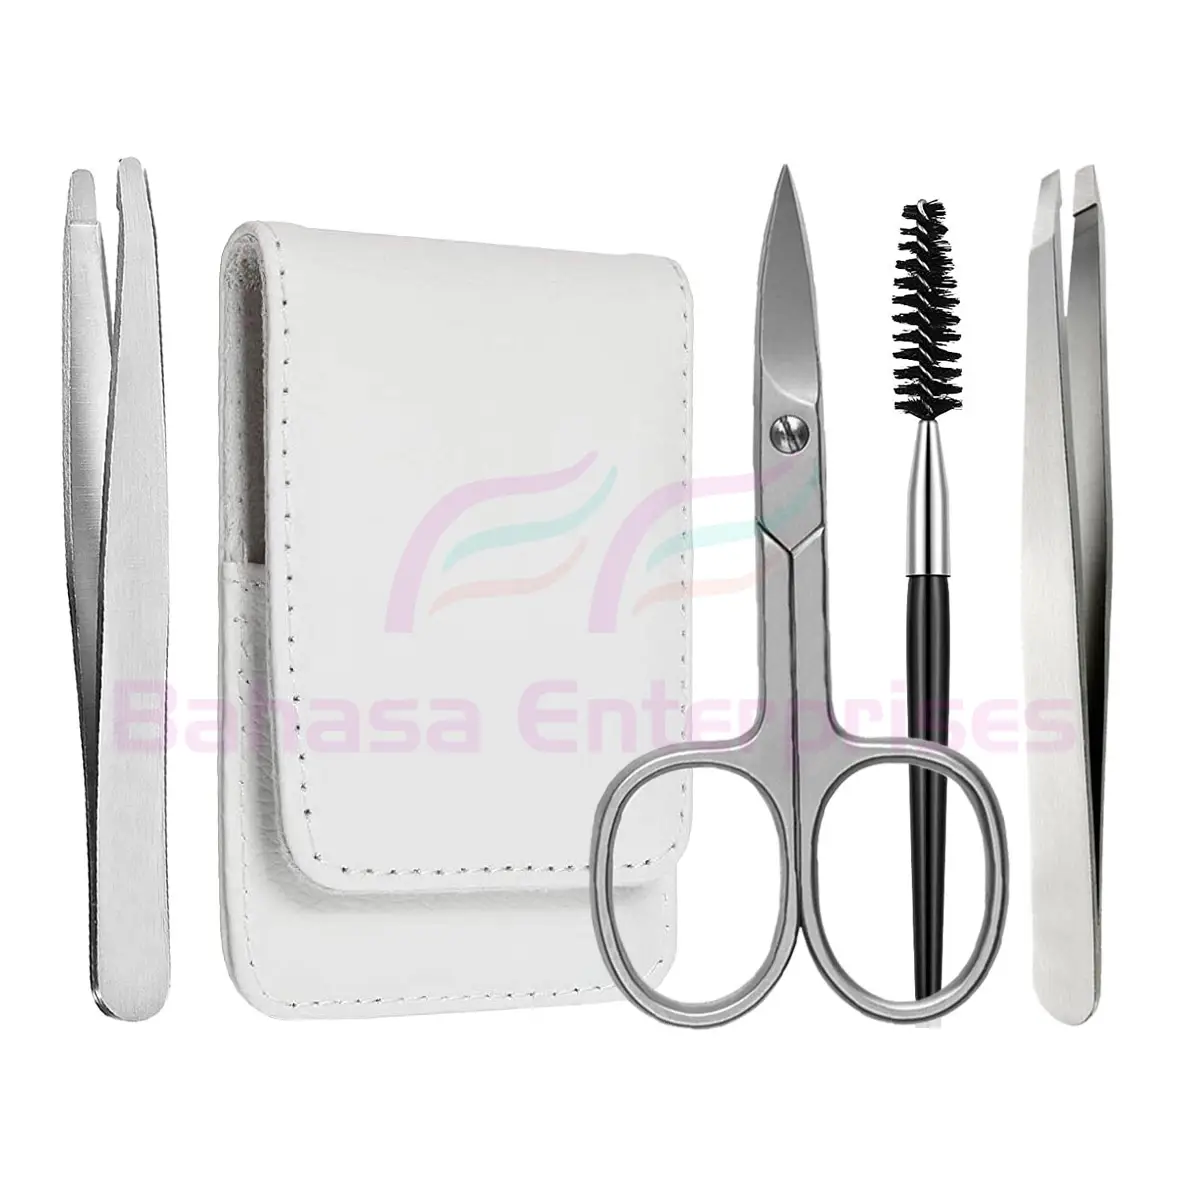 4pcs tweezer set stainless steel Silver tweezer and scissors set with eyebrow brush leather pouch by Bahasa Pro